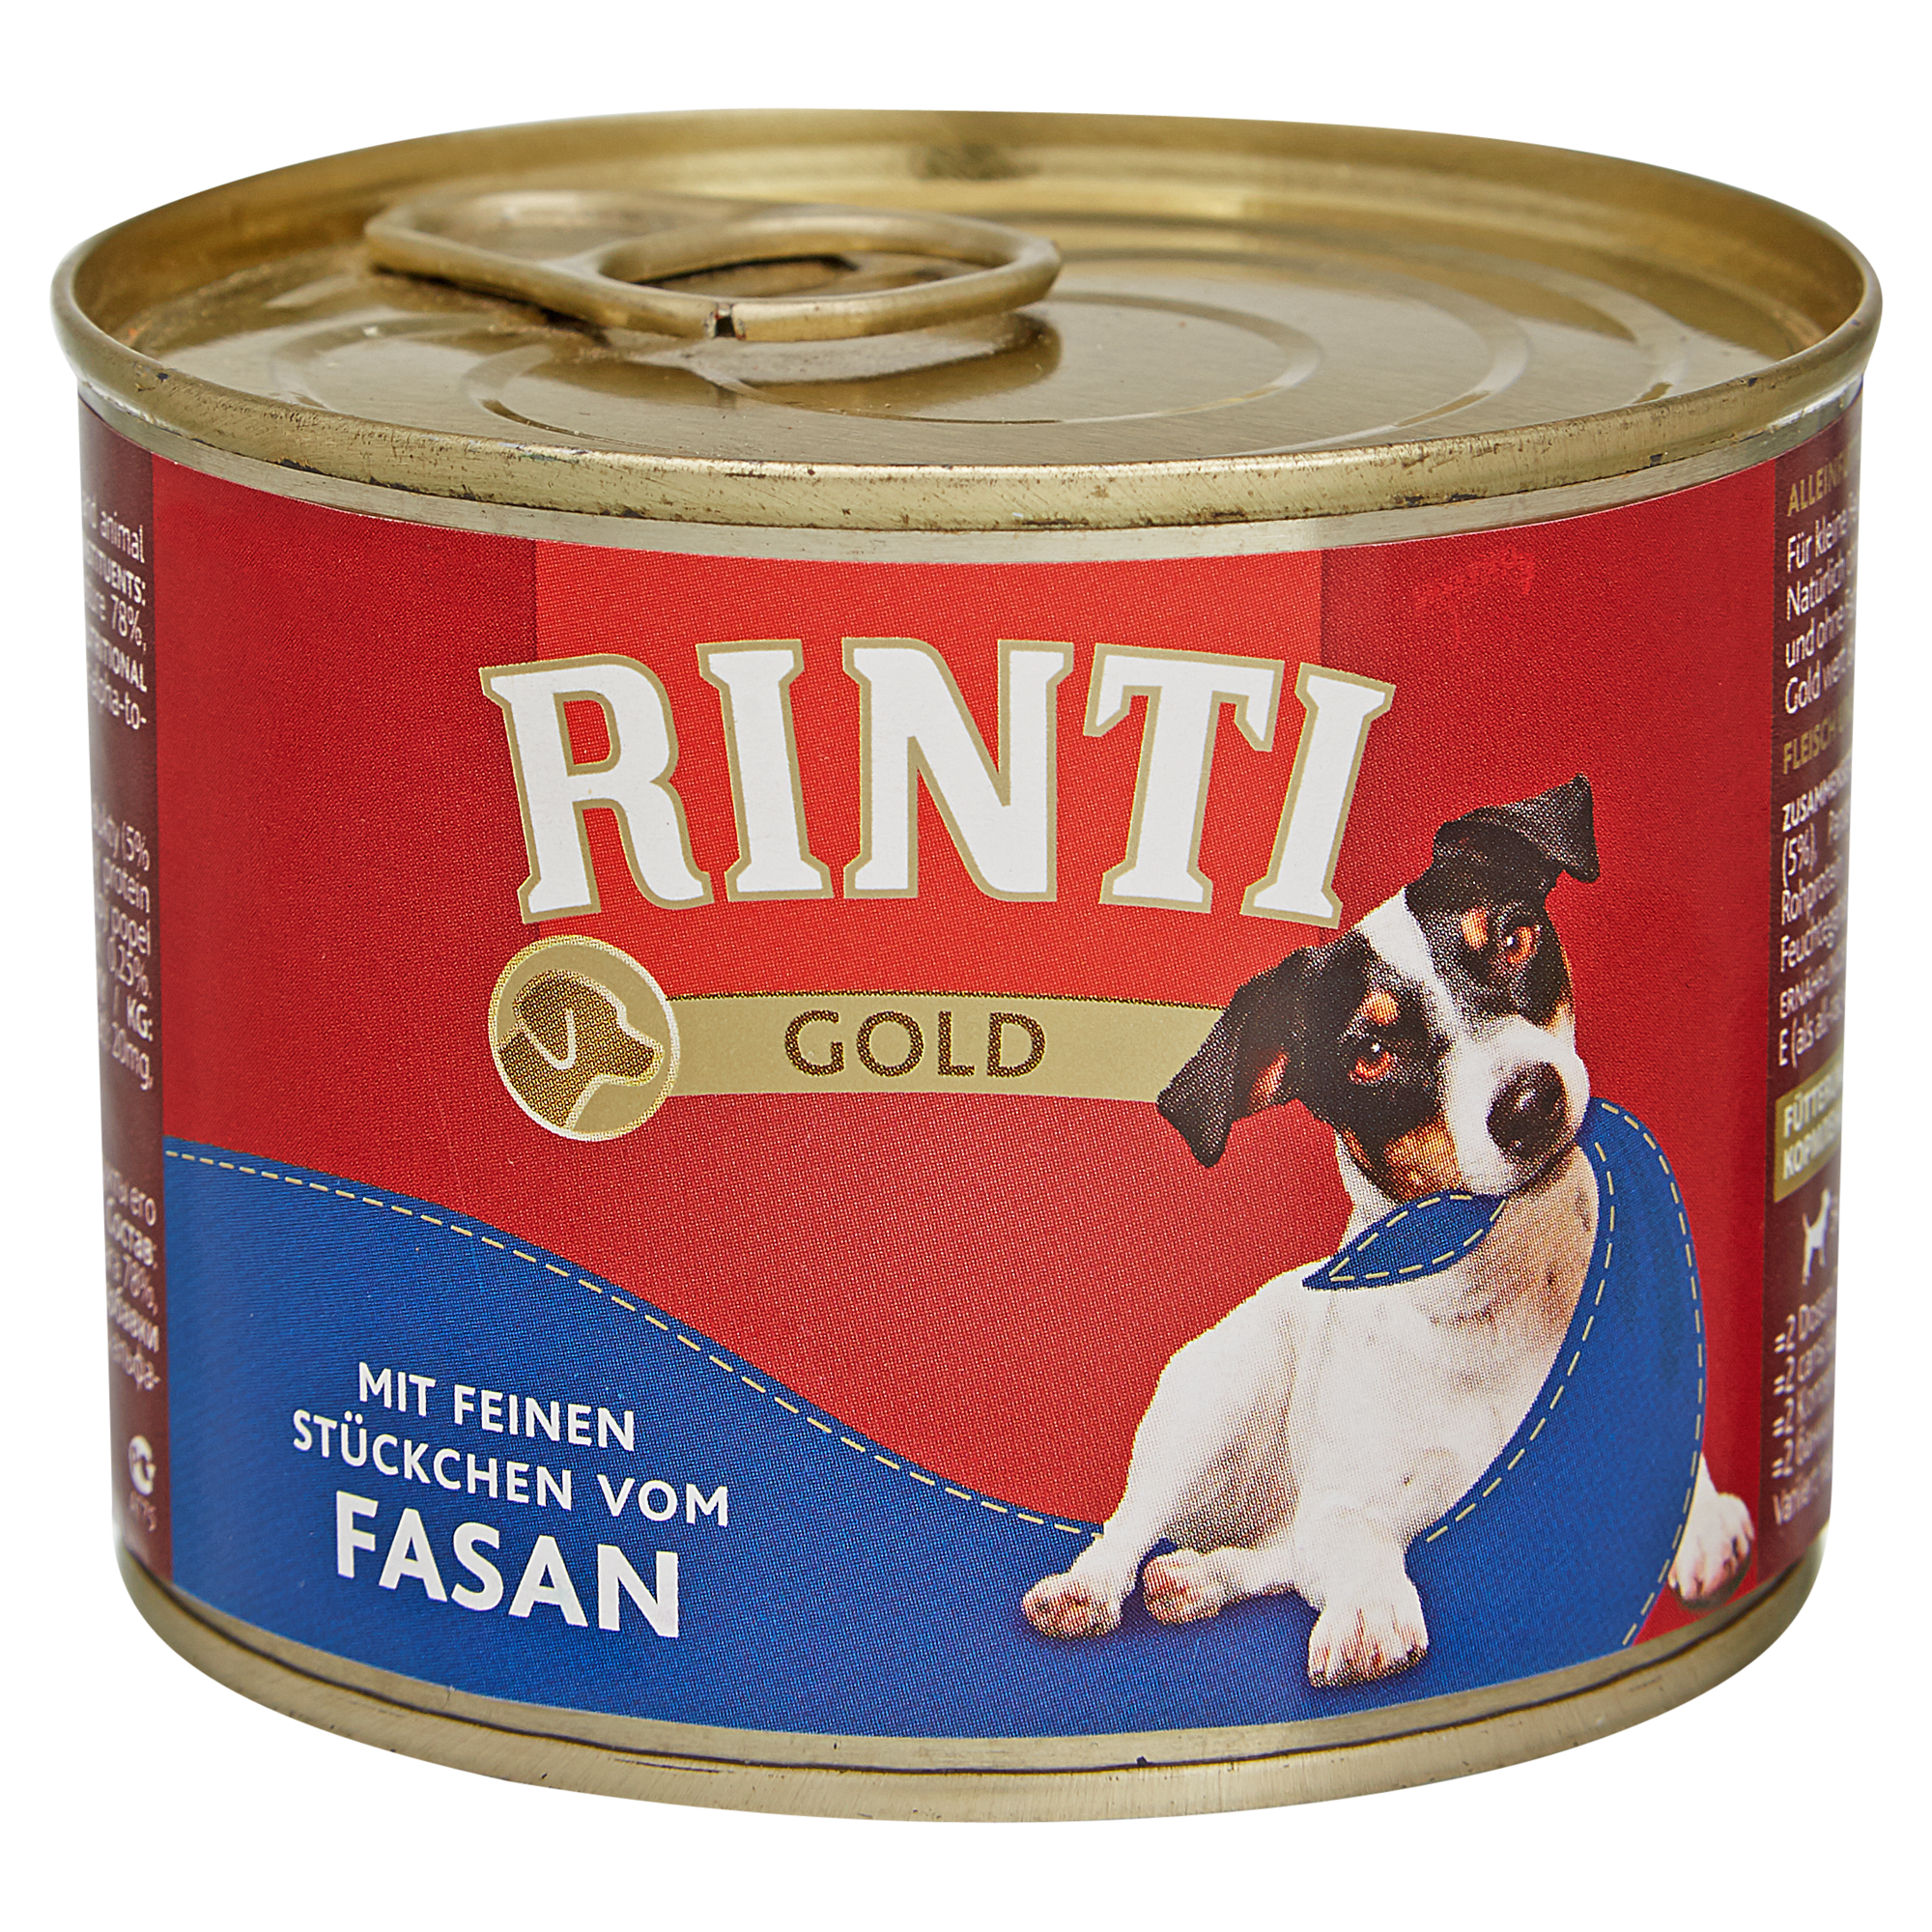 Hundenassfutter "Gold" mit Fasan 185 g + product picture